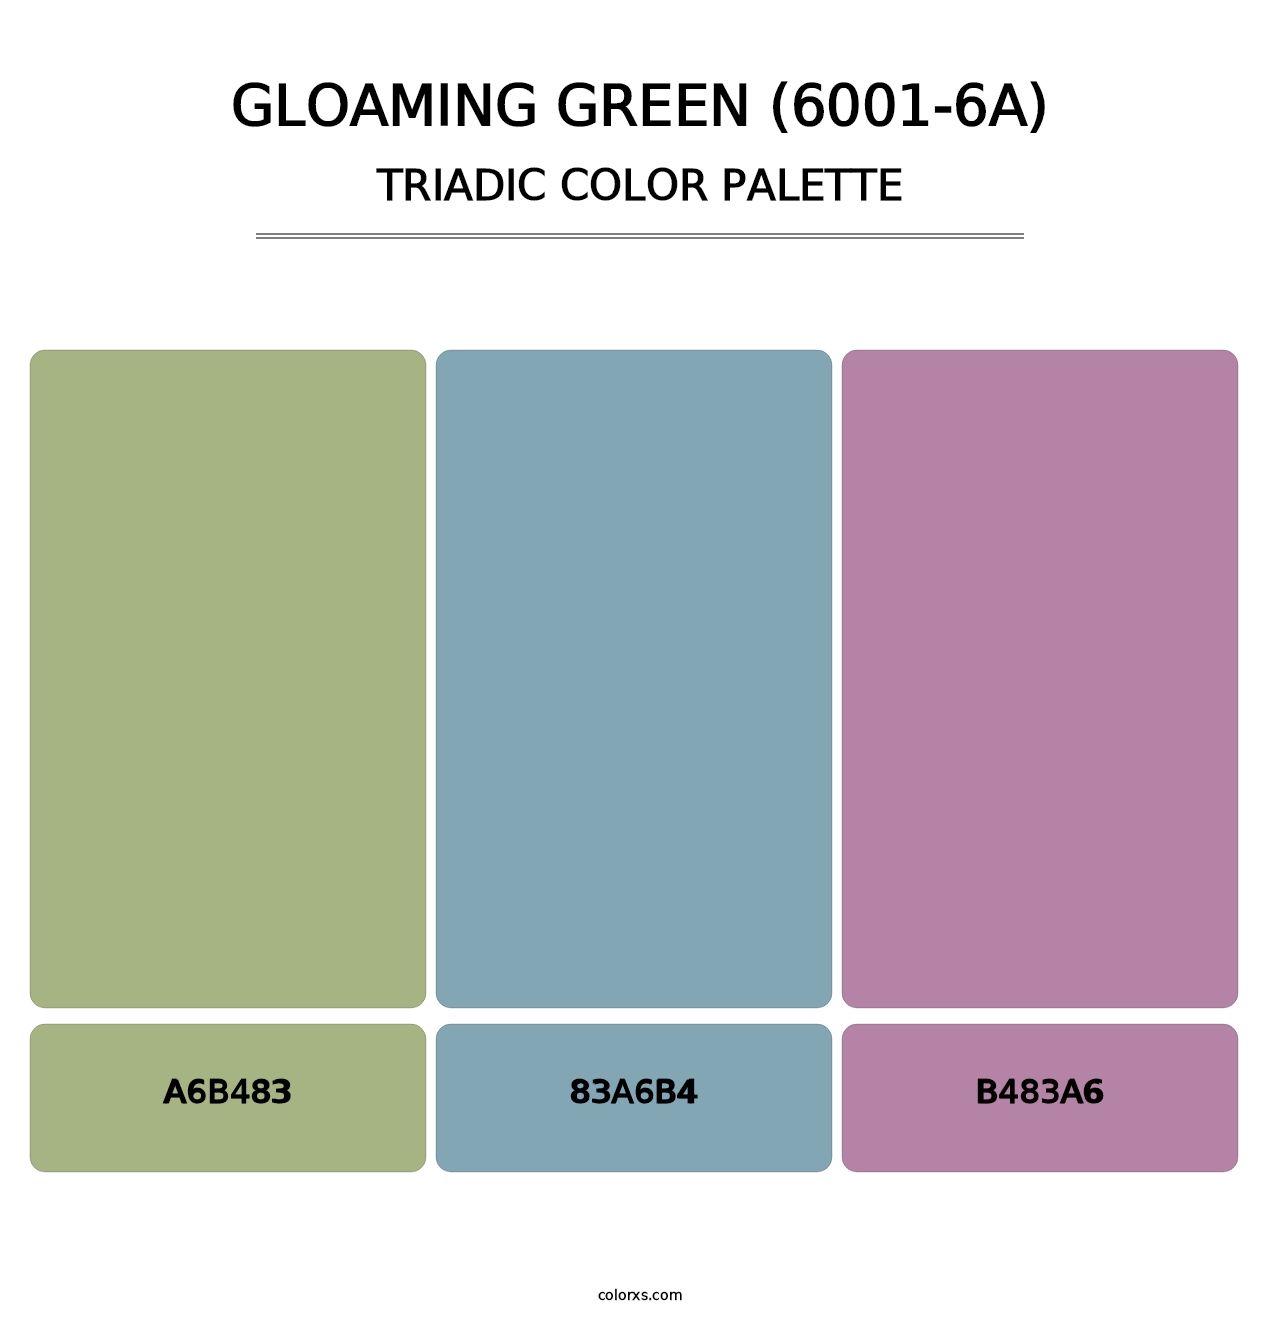 Gloaming Green (6001-6A) - Triadic Color Palette